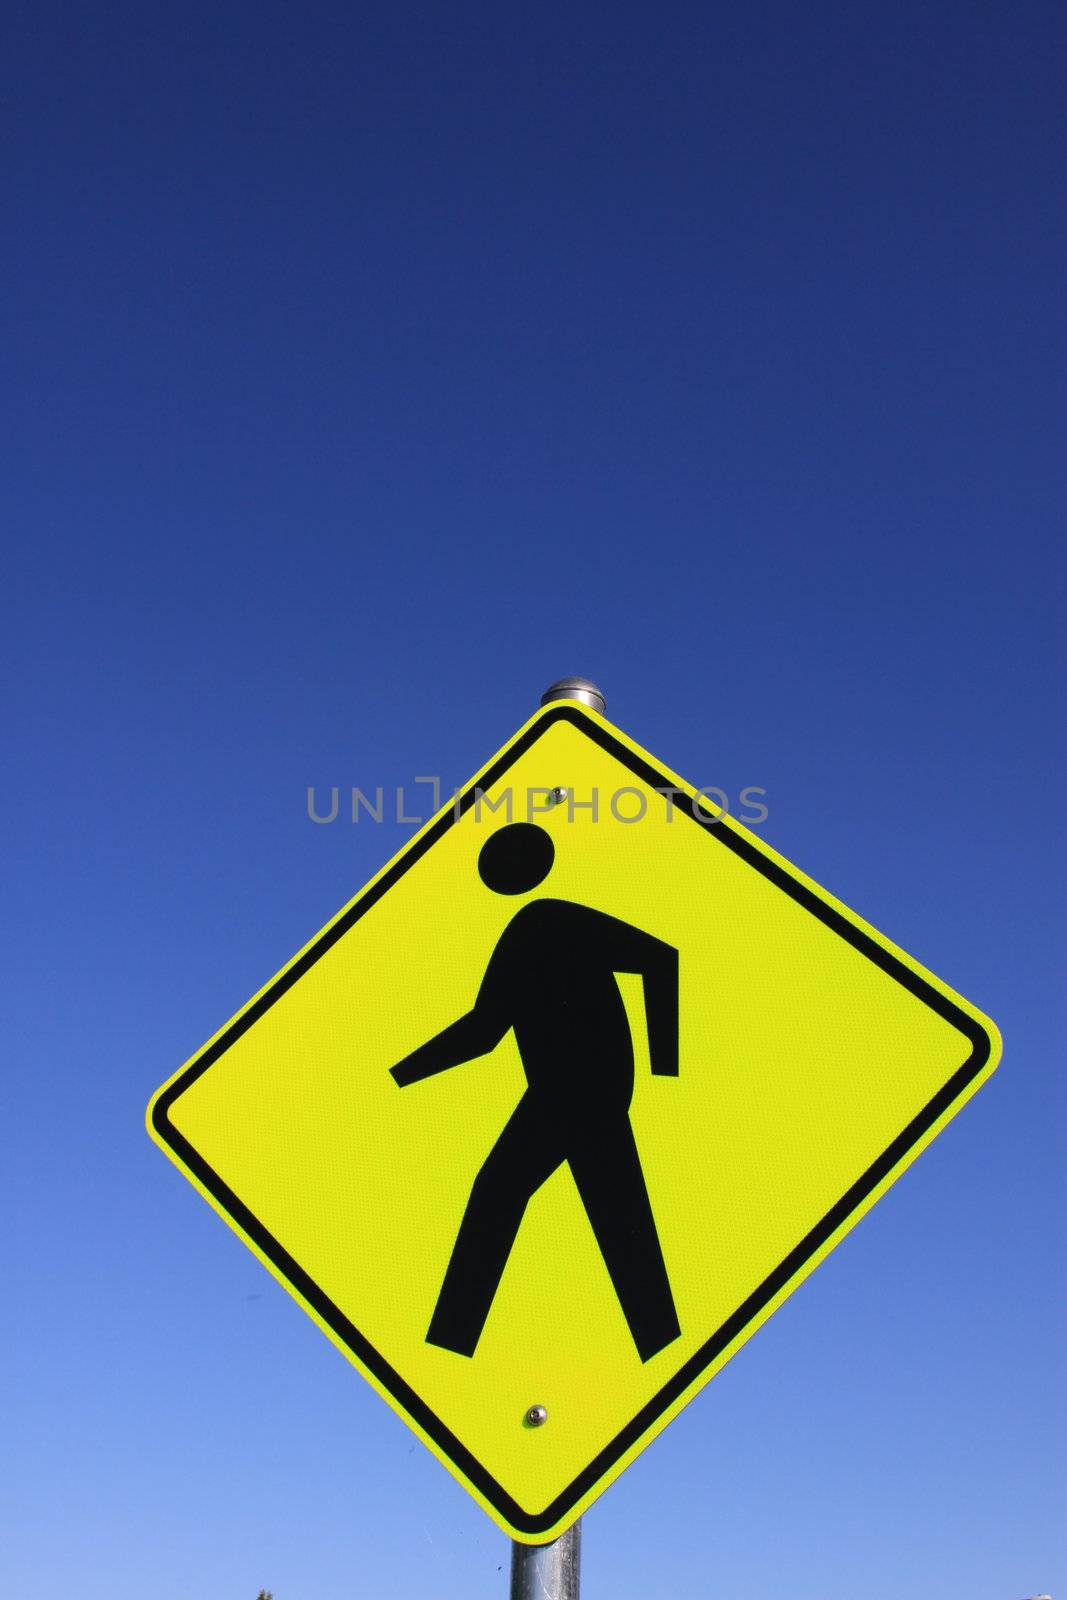 Road crossing sign over blue sky.